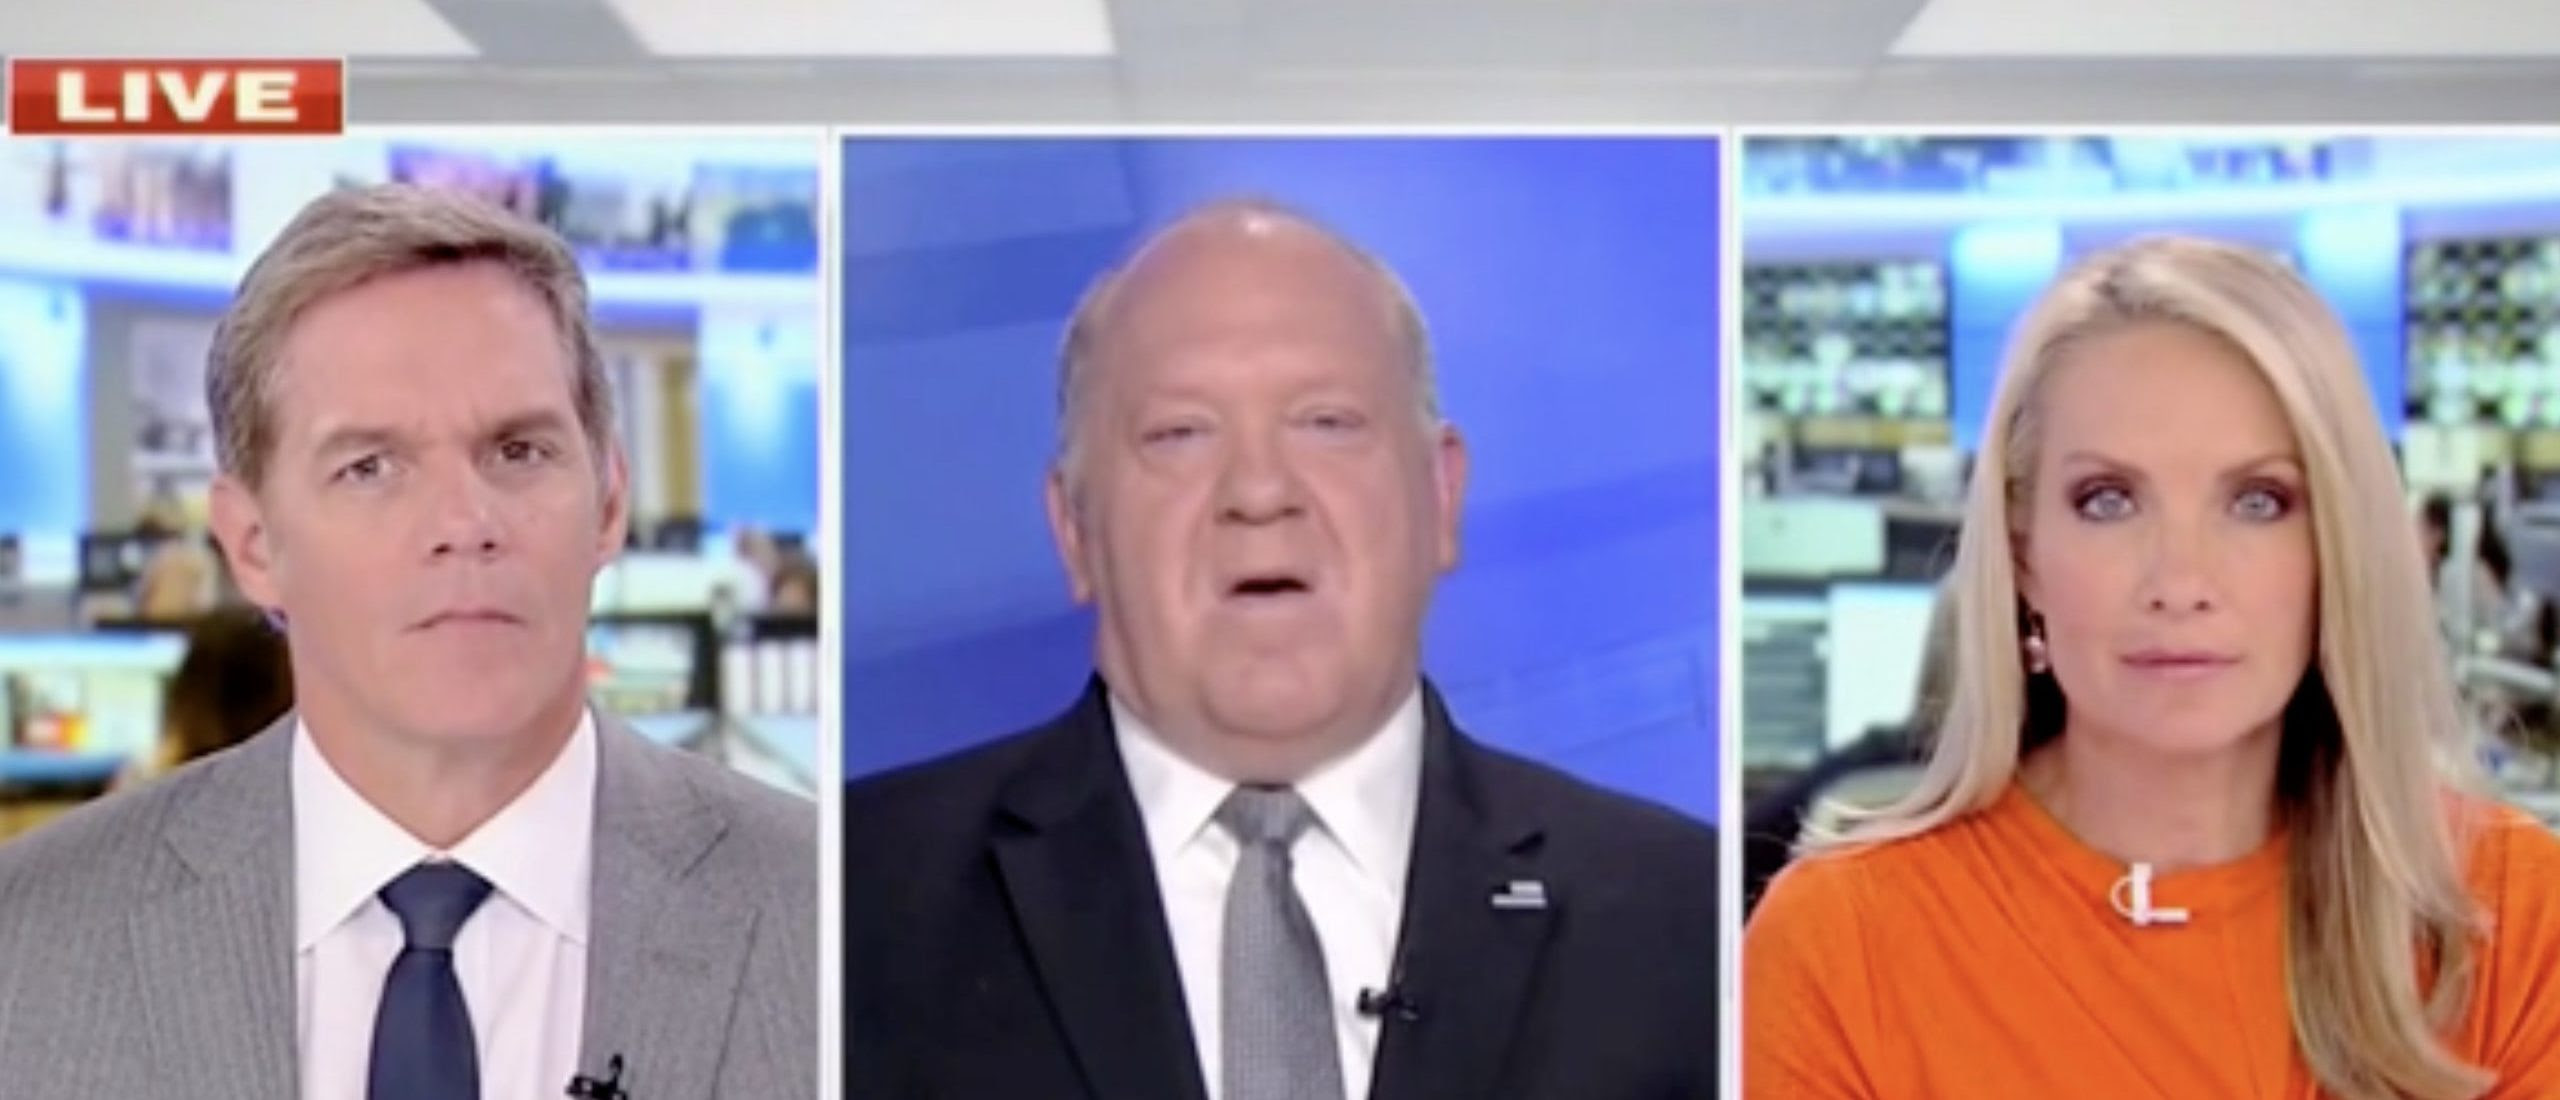 ‘By Design’: Former ICE Director Says Biden Has ‘Intentionally Unsecured The Most Secure Border’ To Build Democratic Voters